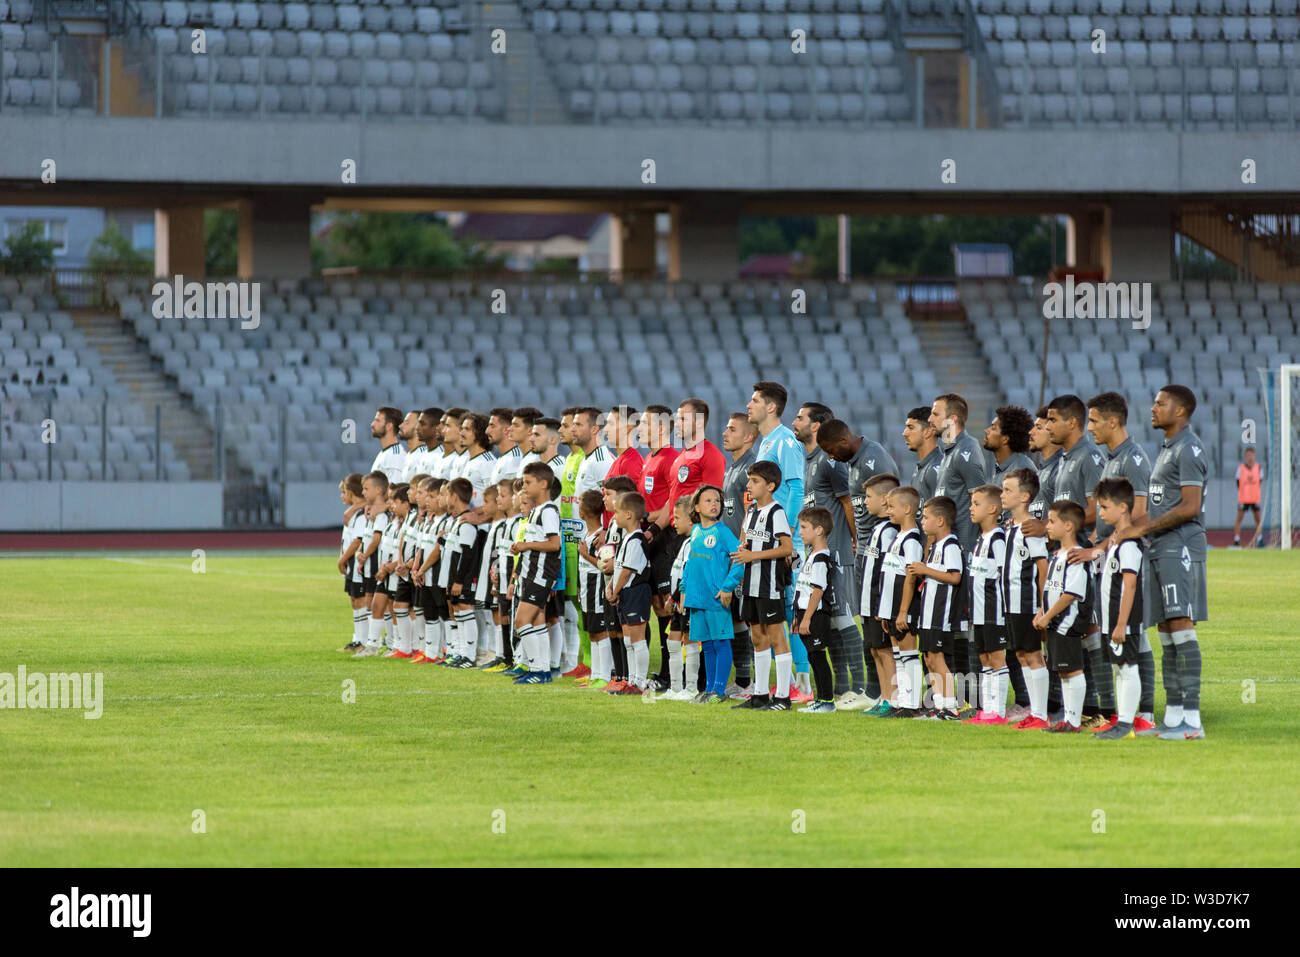 CLUJ NAPOCA, ROMANIA - JULY 12, 2019: Soccer players of Universitatea Cluj and PAOK Saloniki entering the field at the beginning of a friendly footbal Stock Photo